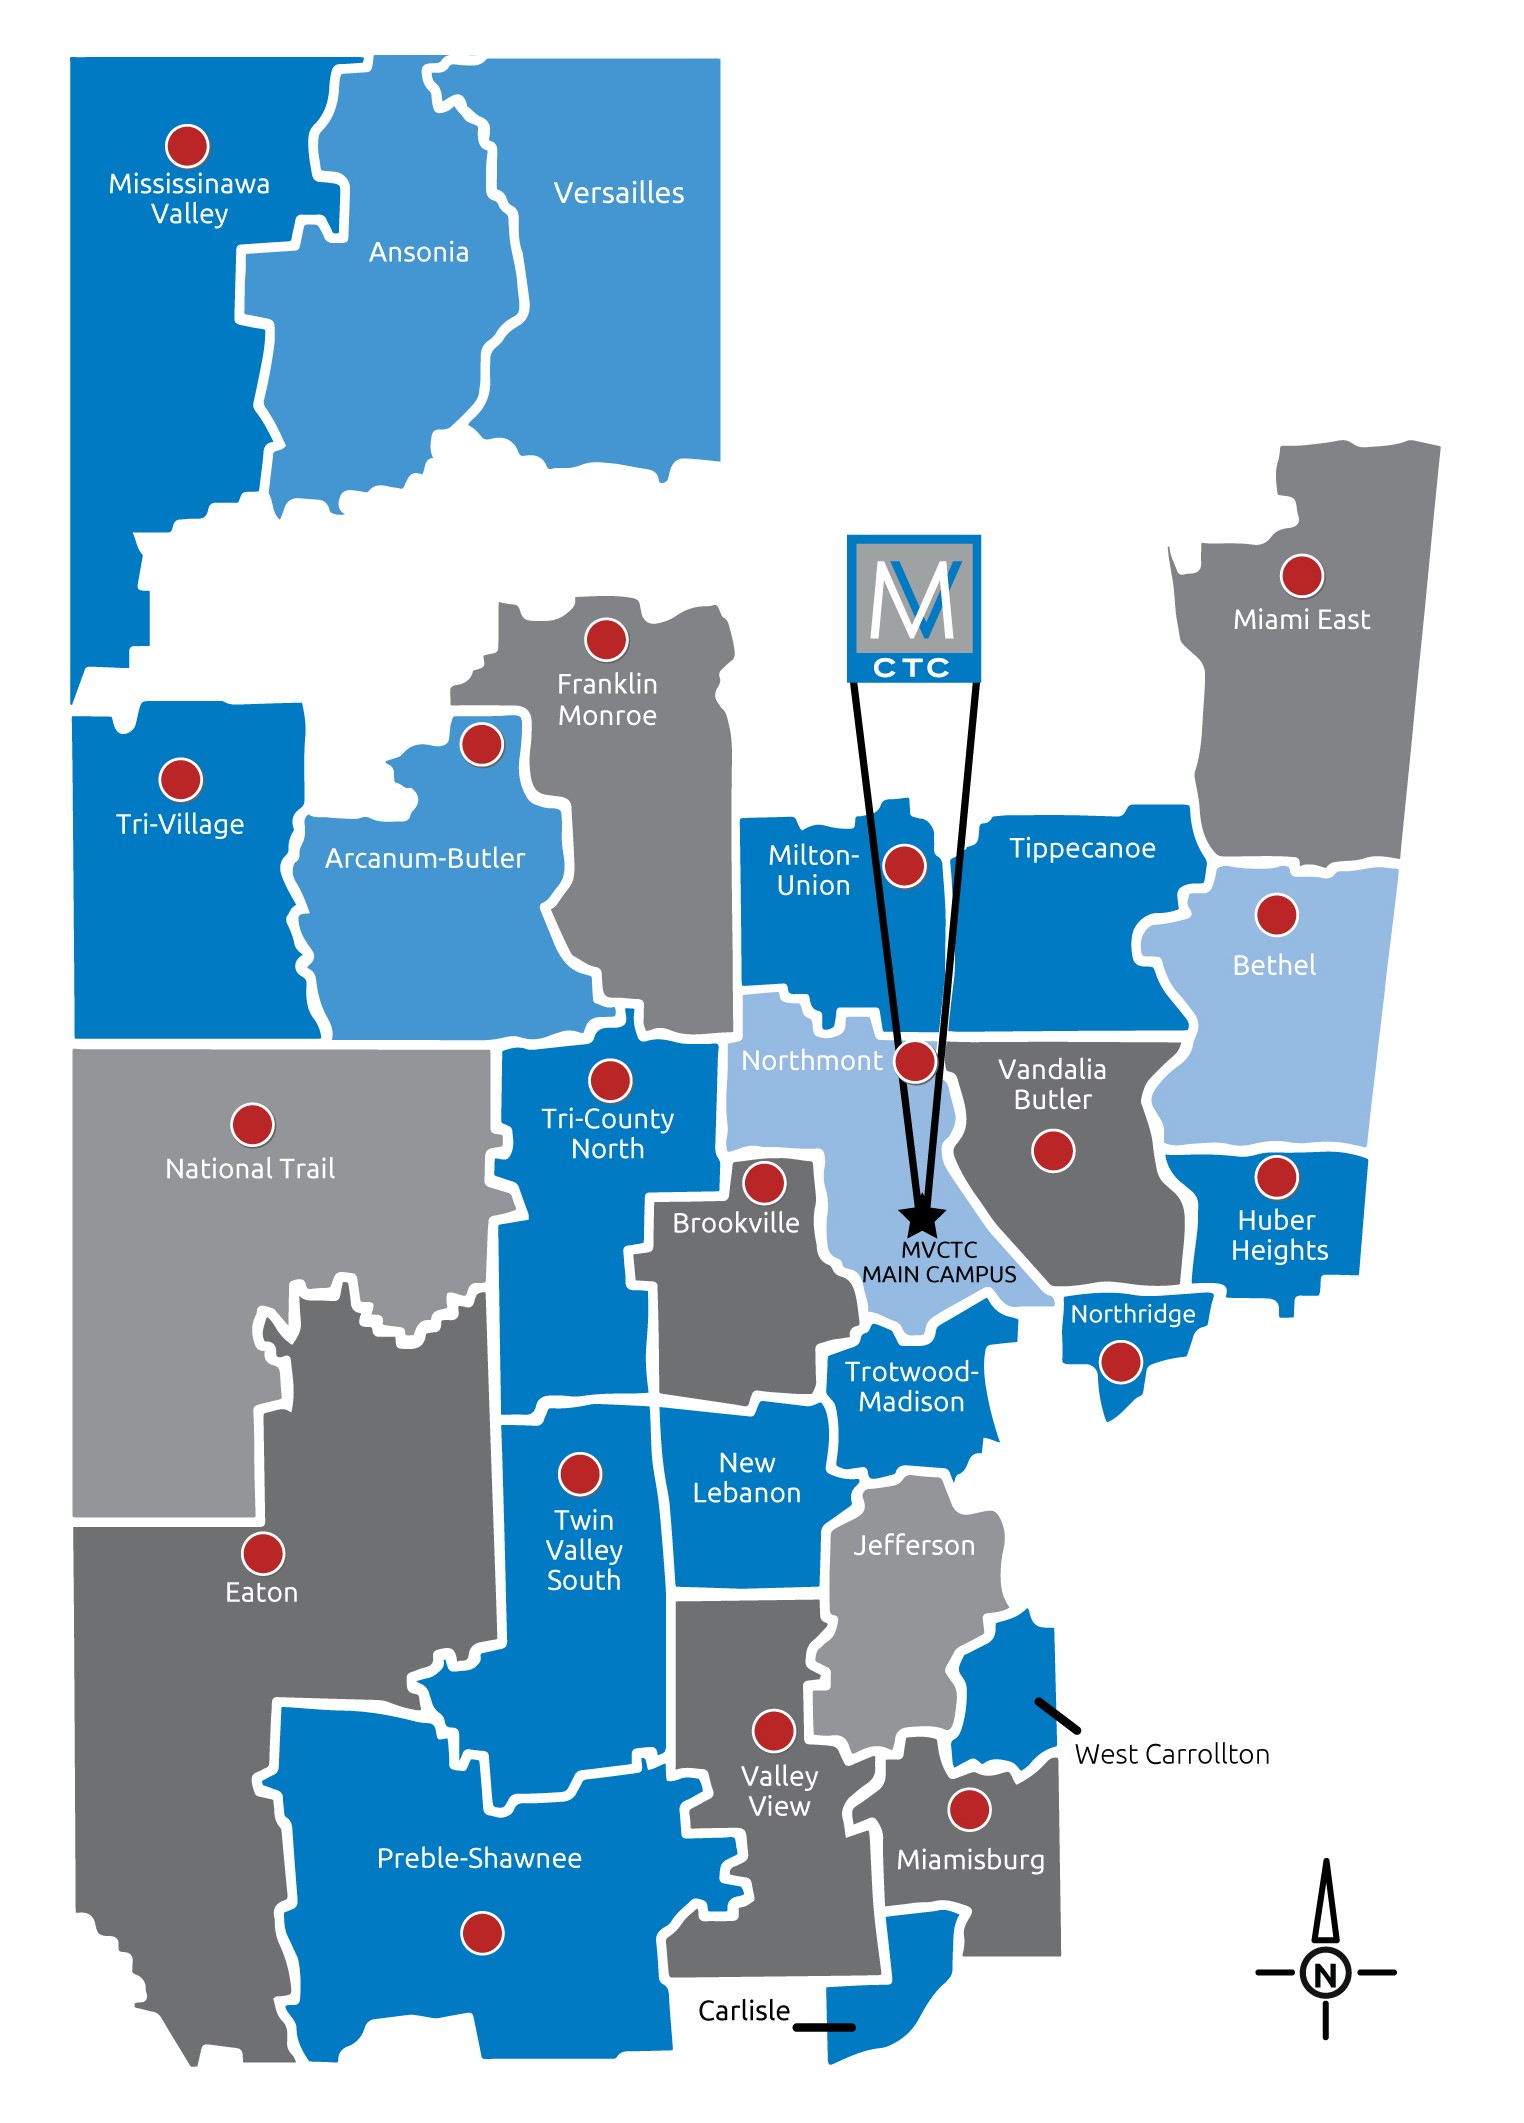 MVCTC Partner School Districts Map Image